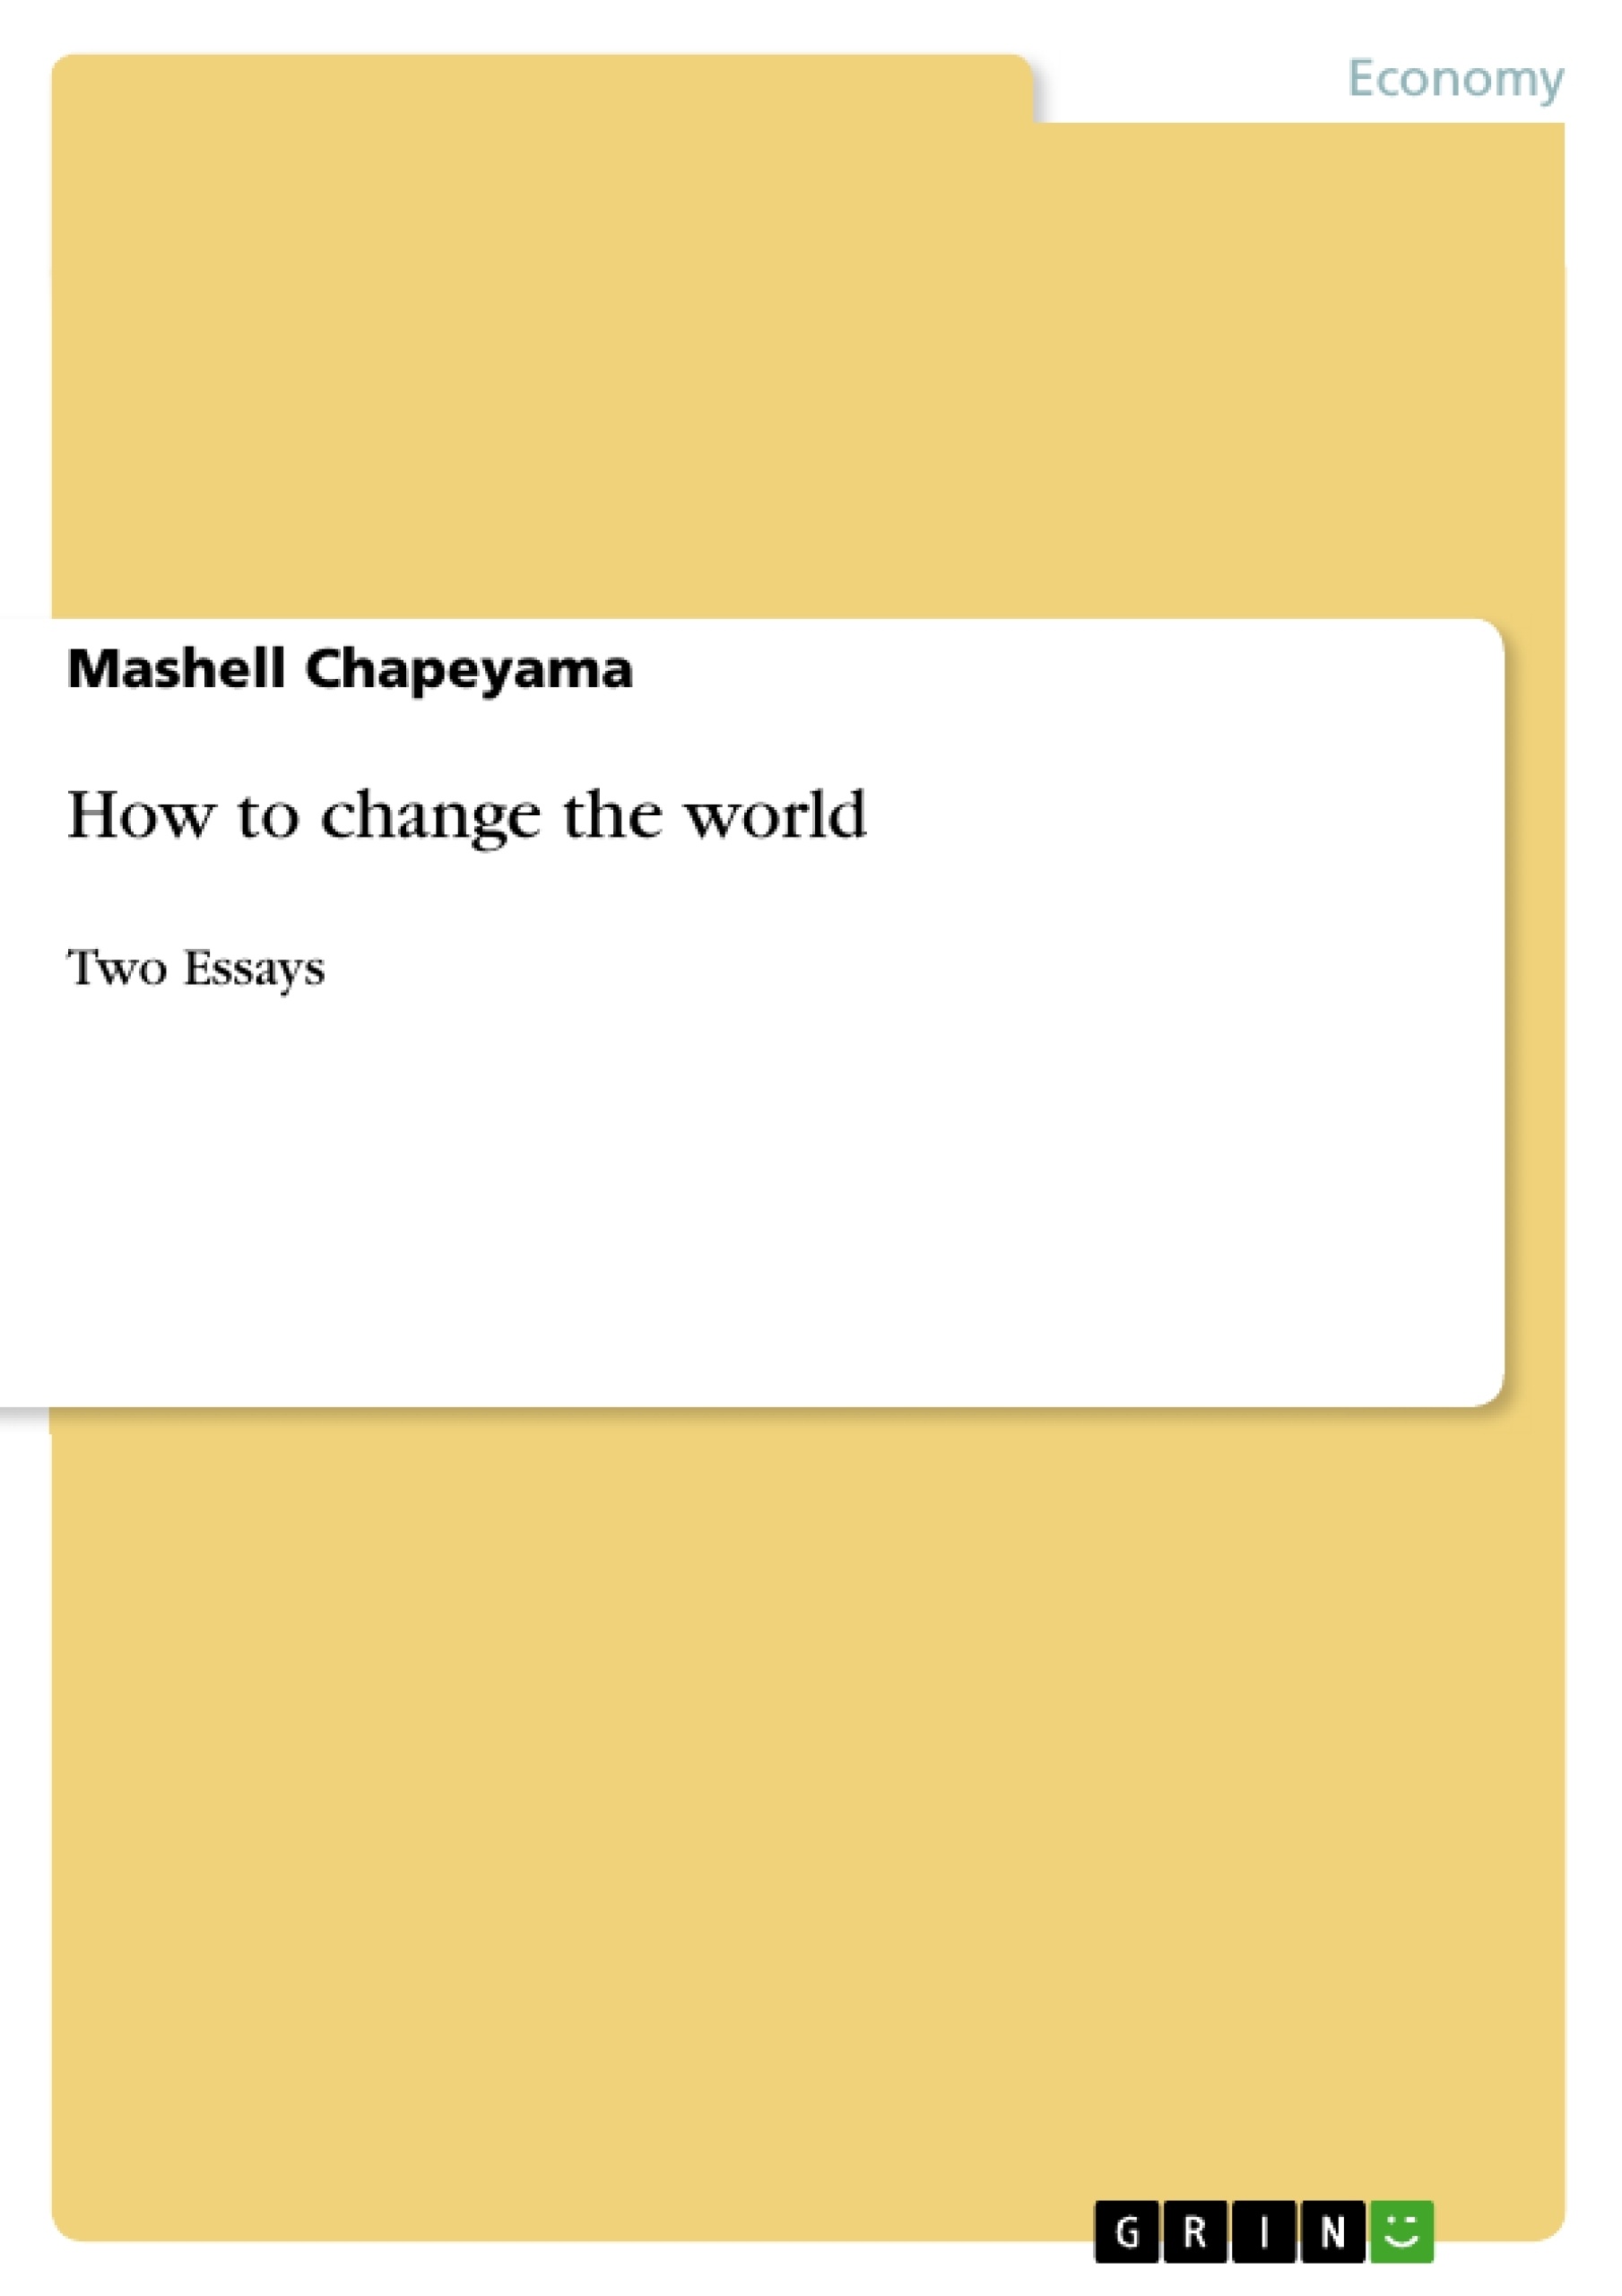 Title: How to change the world